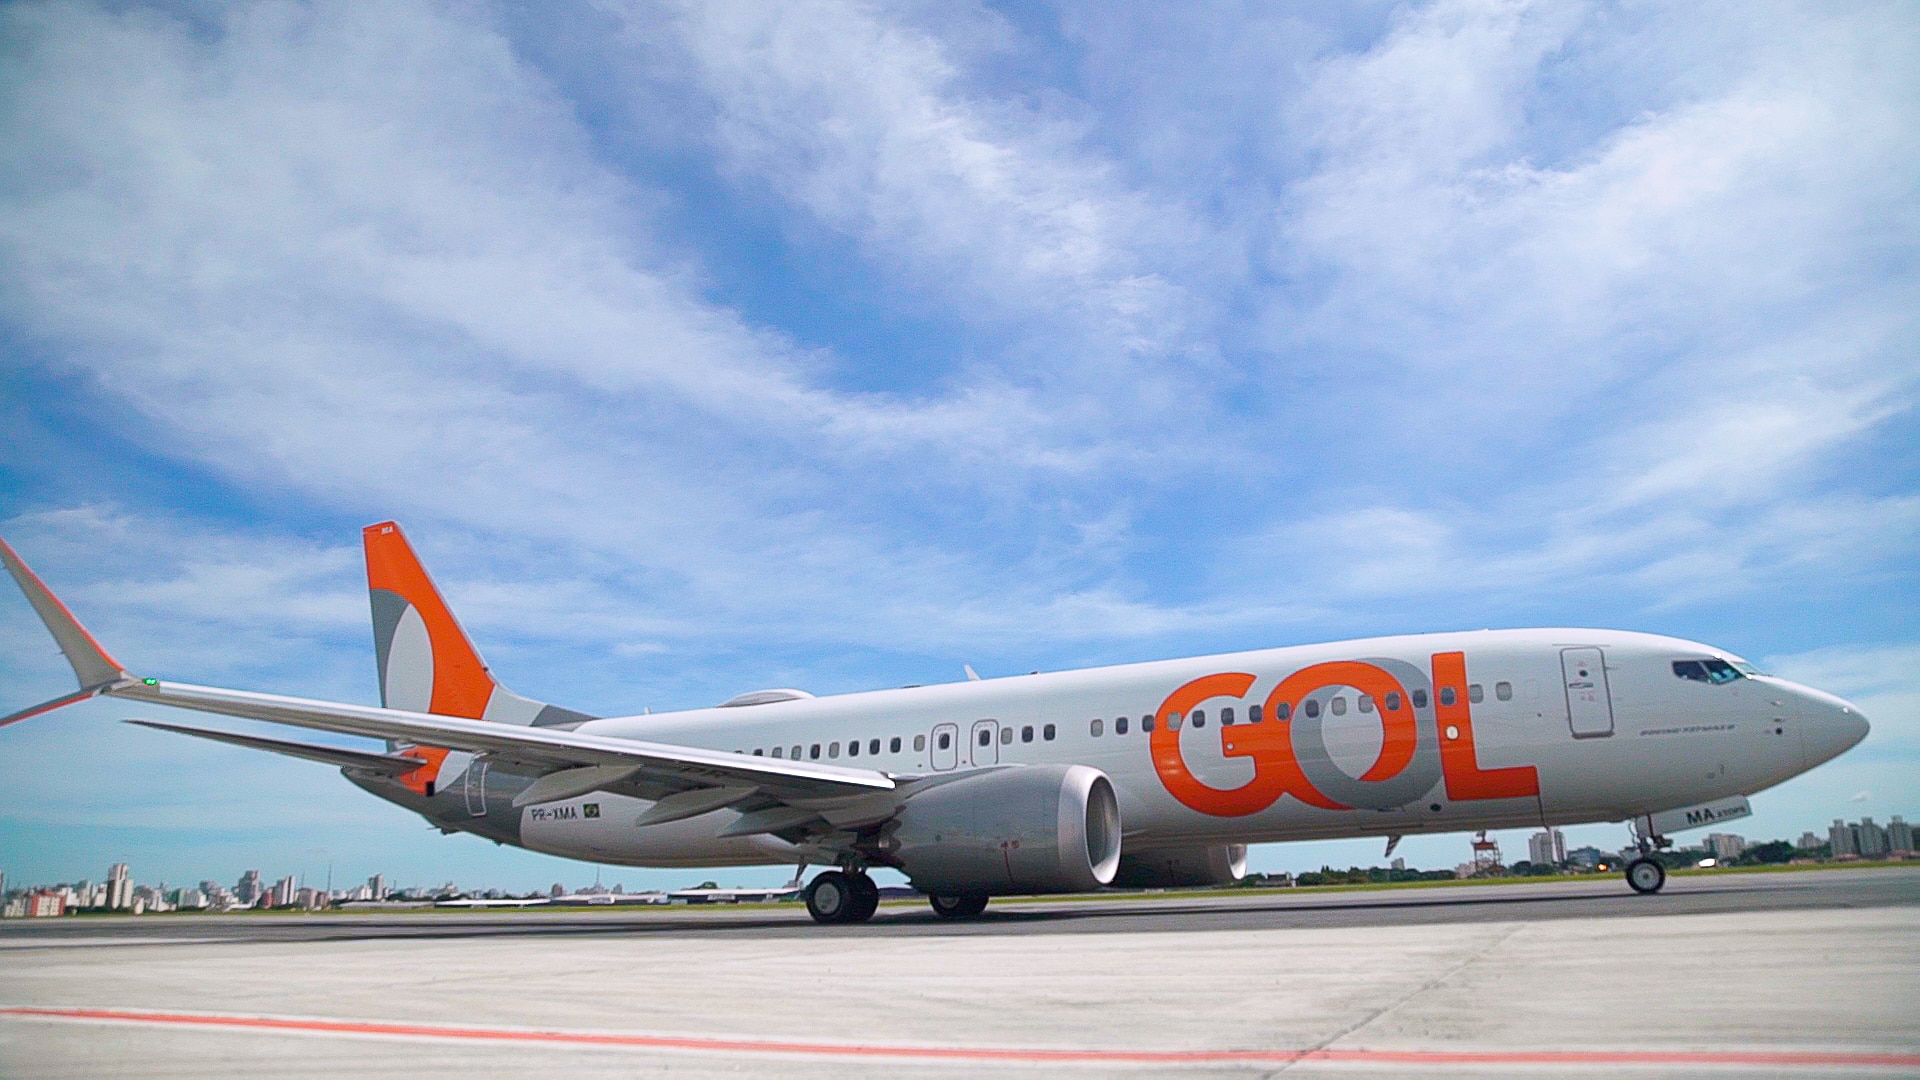 4 Reasons Why Gol Airlines Is the Best!